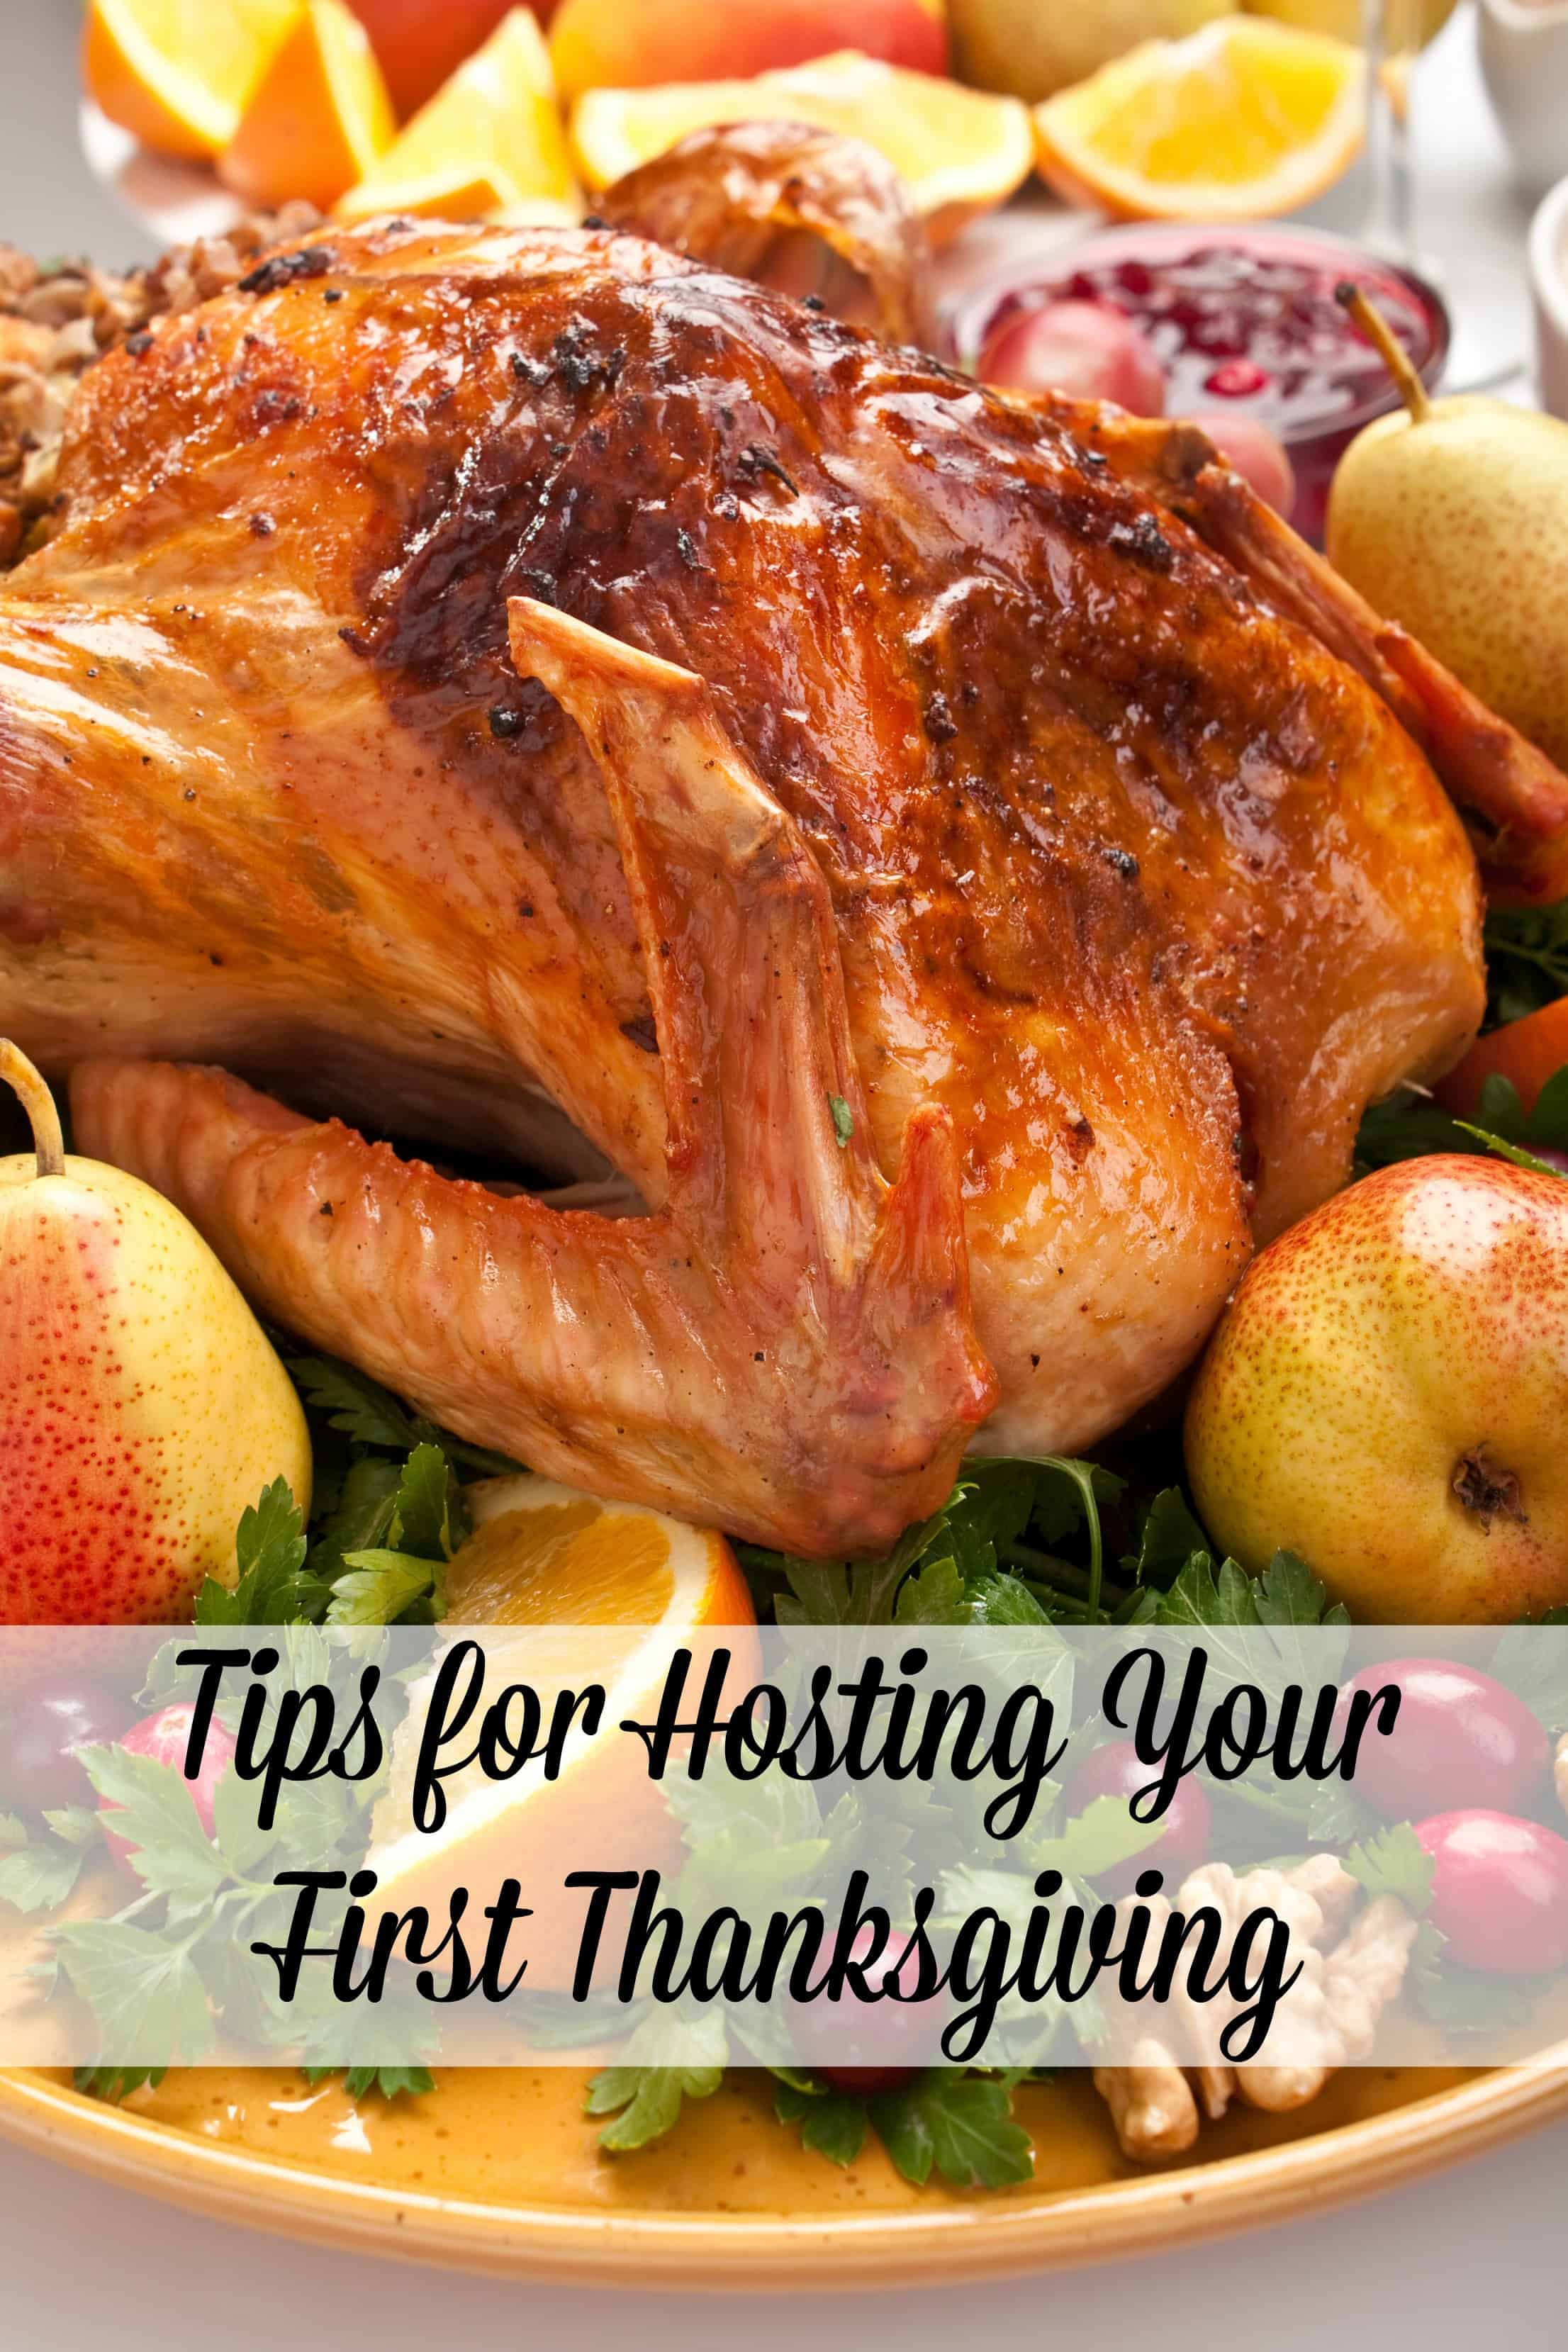 Tips for Hosting Your First Thanksgiving